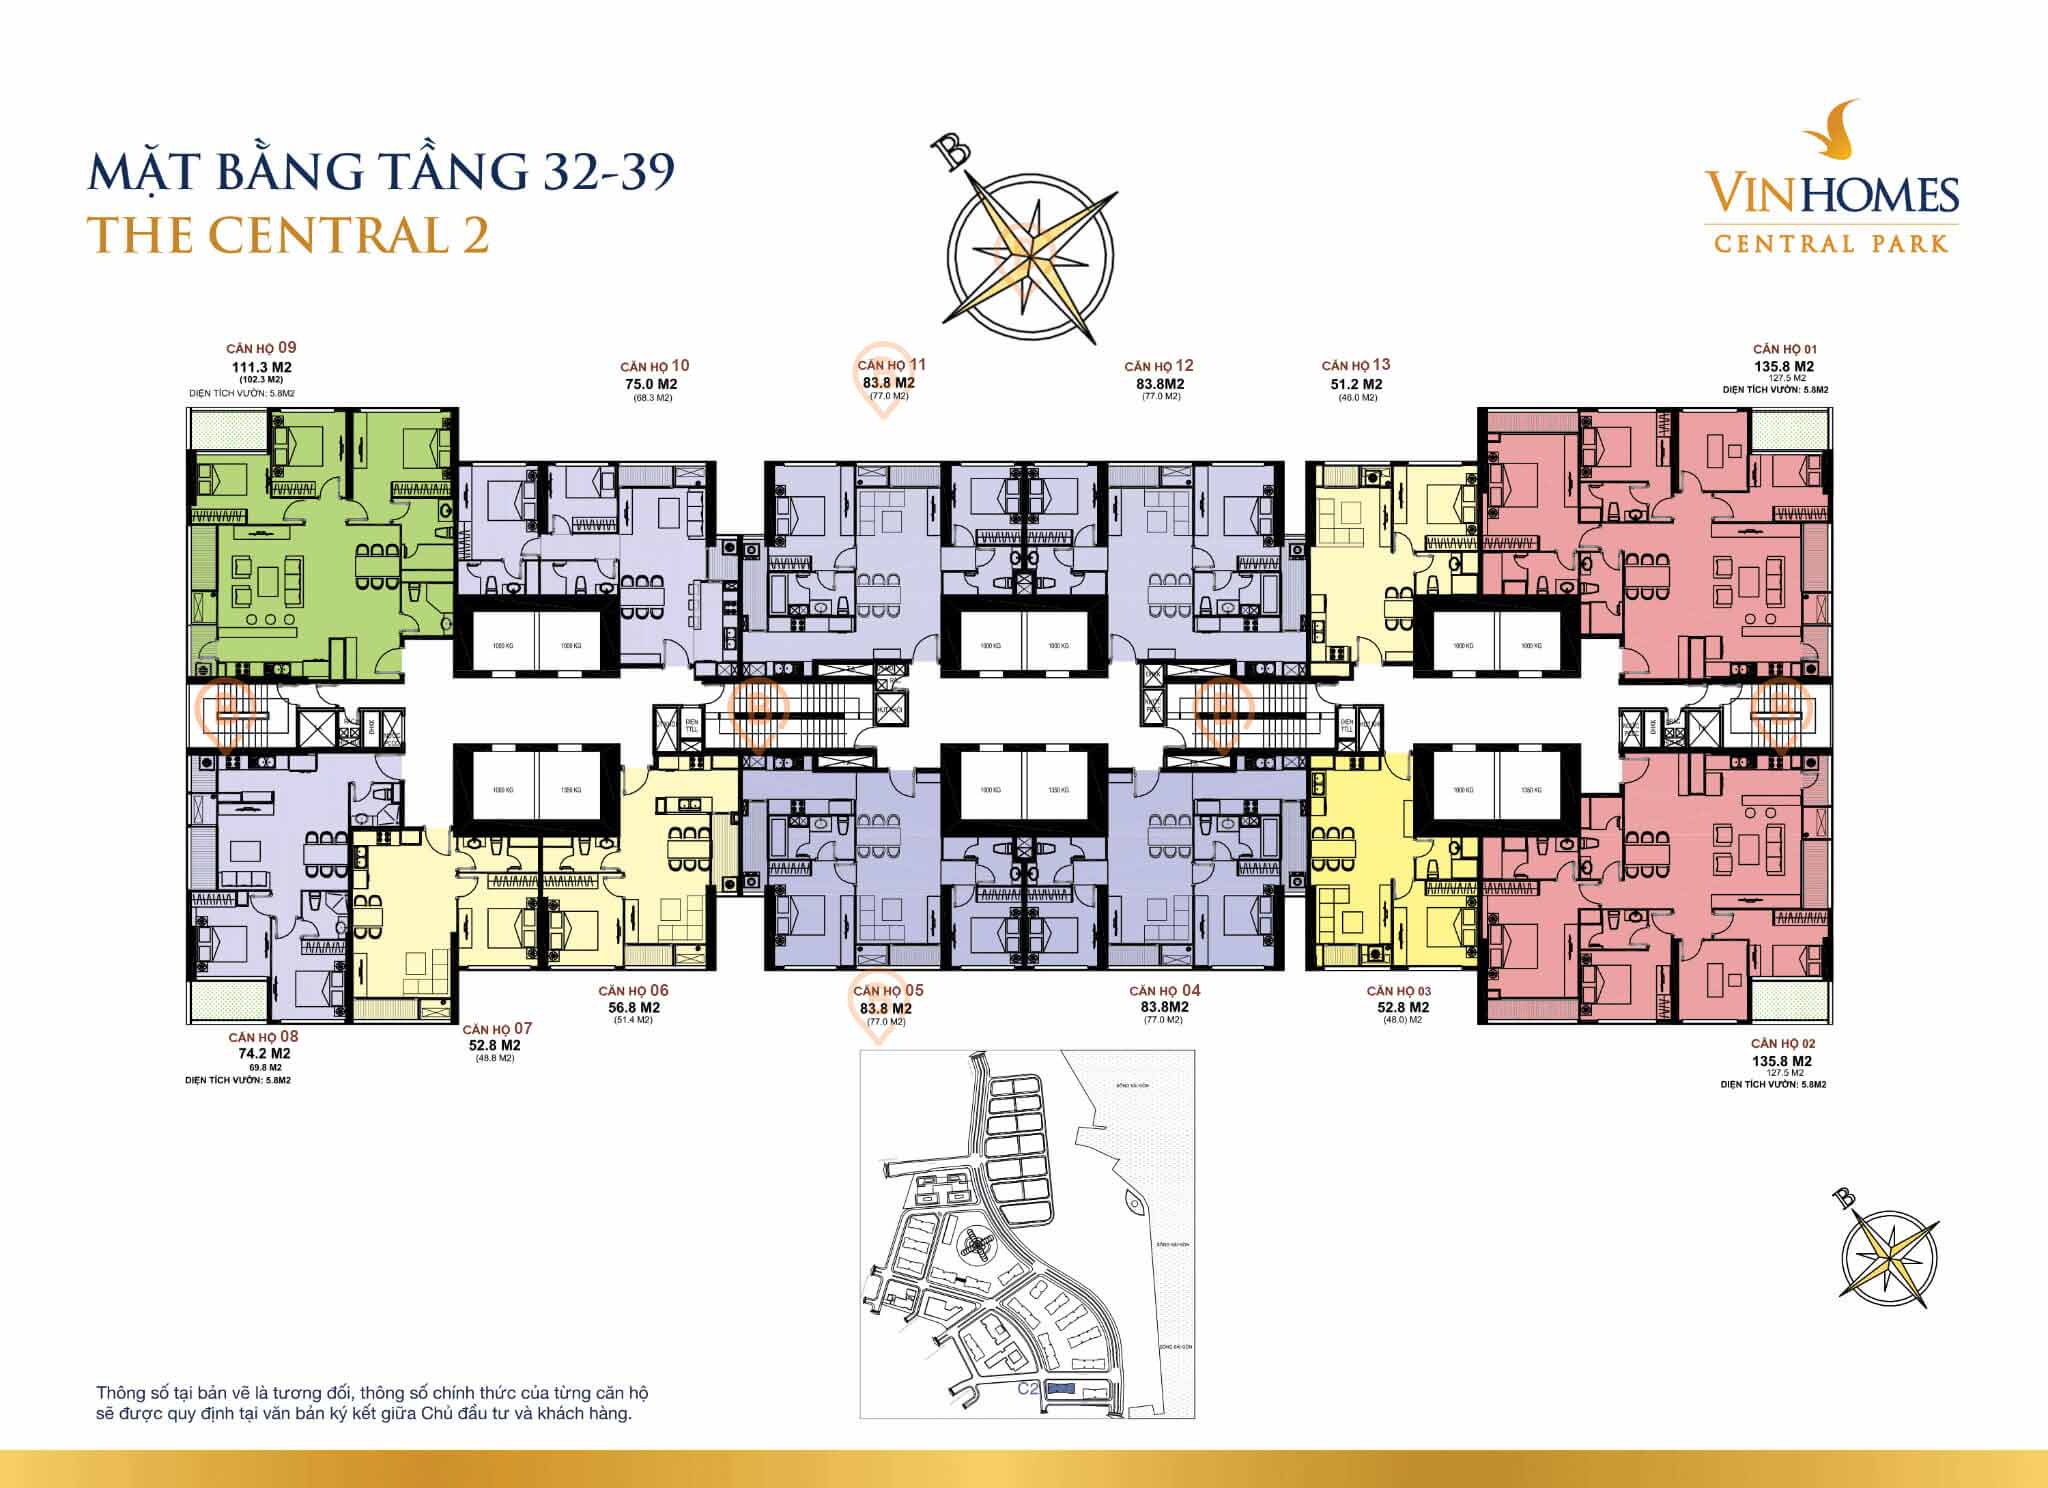 Mặt bằng layout tòa The Central 2 tầng 32-39 tại Vinhomes Central Park